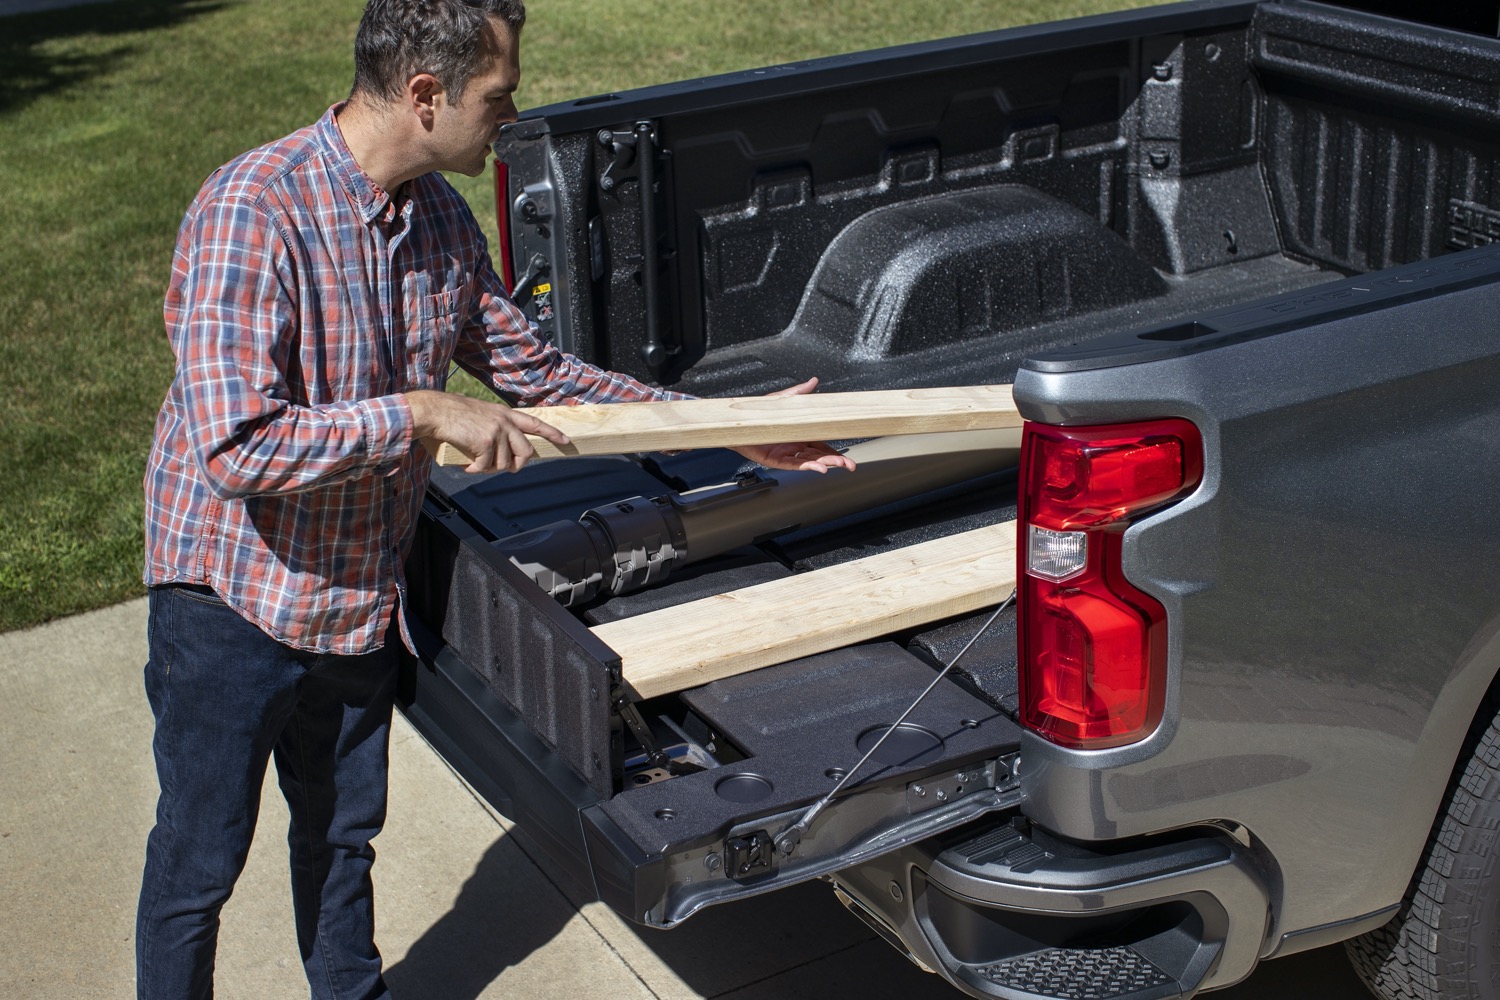 Load Stop Lock Compatible with GMC MultiPro and Chevrolet MultiFlex Tailgates Safely Secures Your Items in Truck Bed When Hauling by Locking The Midgate Made in The USA Kicker System 